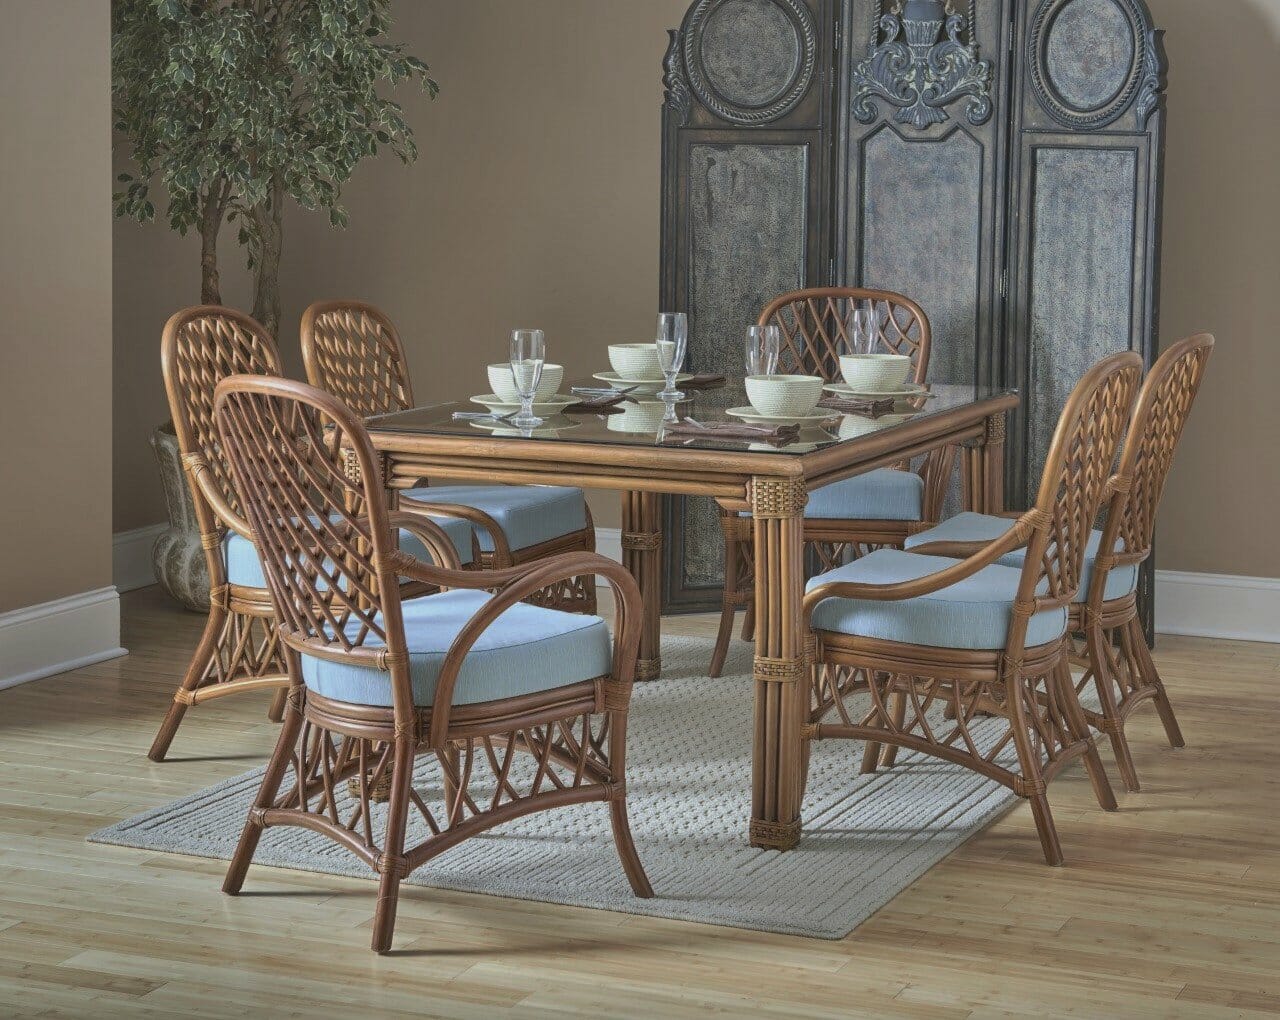 South Sea Rattan Dining Room Sets